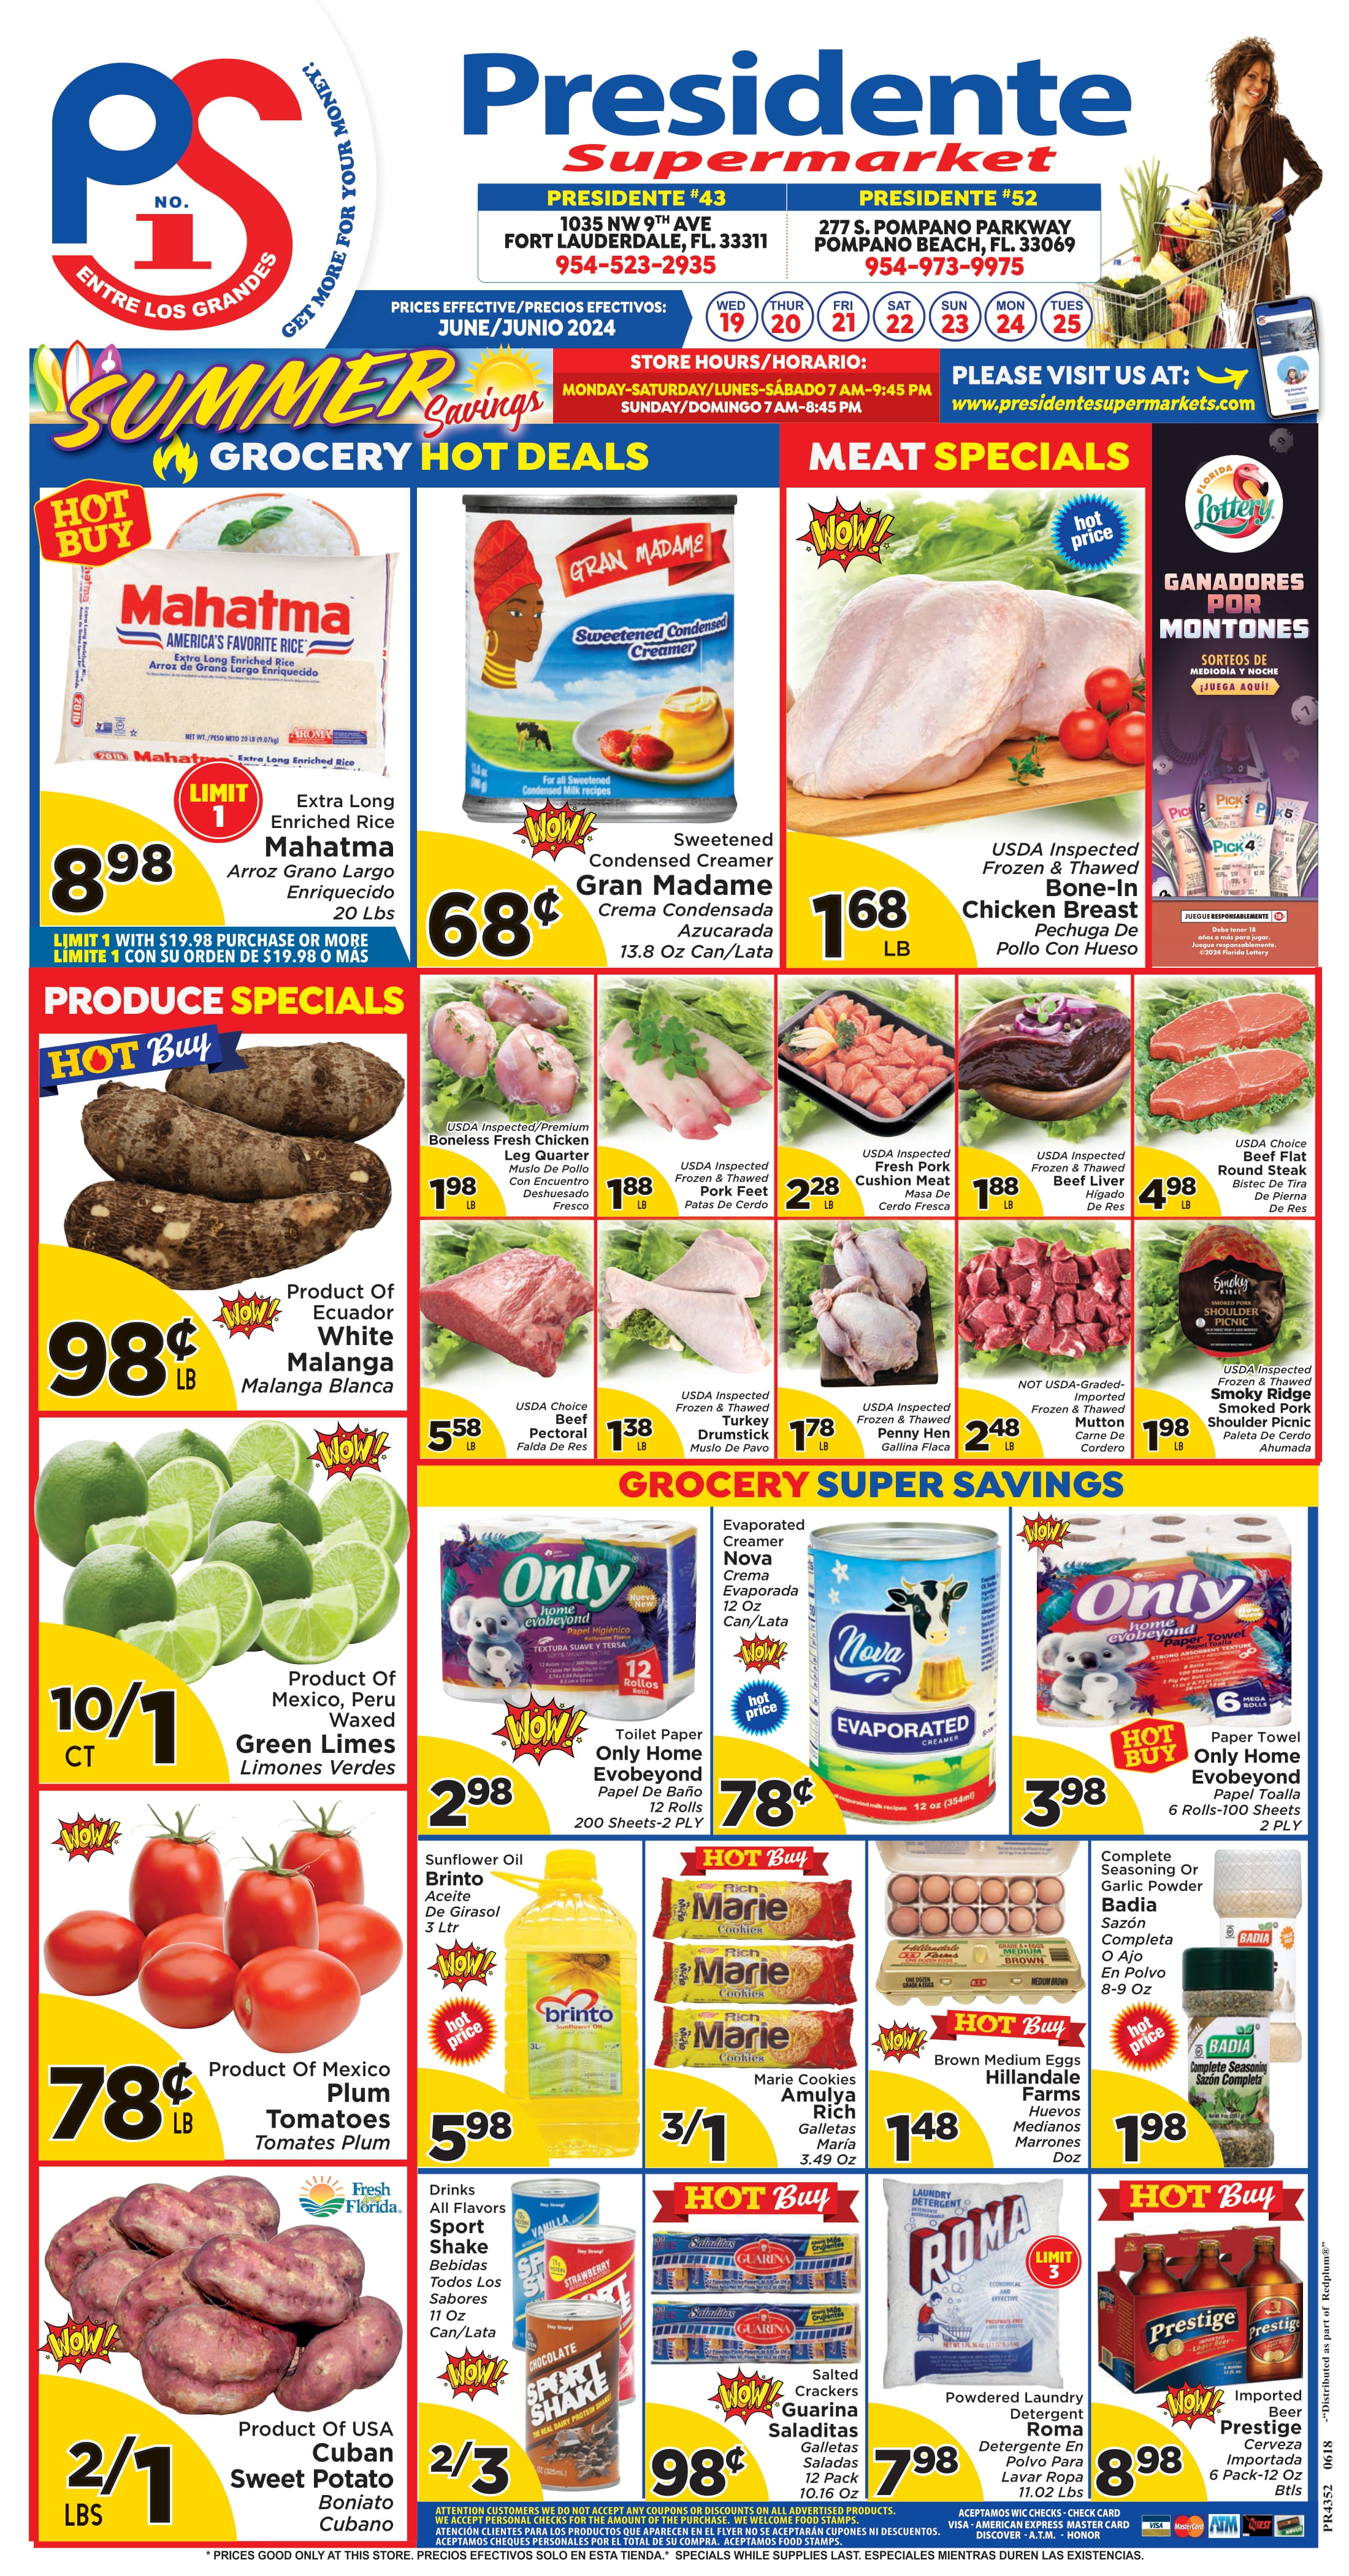 Presidente Supermarket - Weekly Promo for Store 43 & 52 Page 1